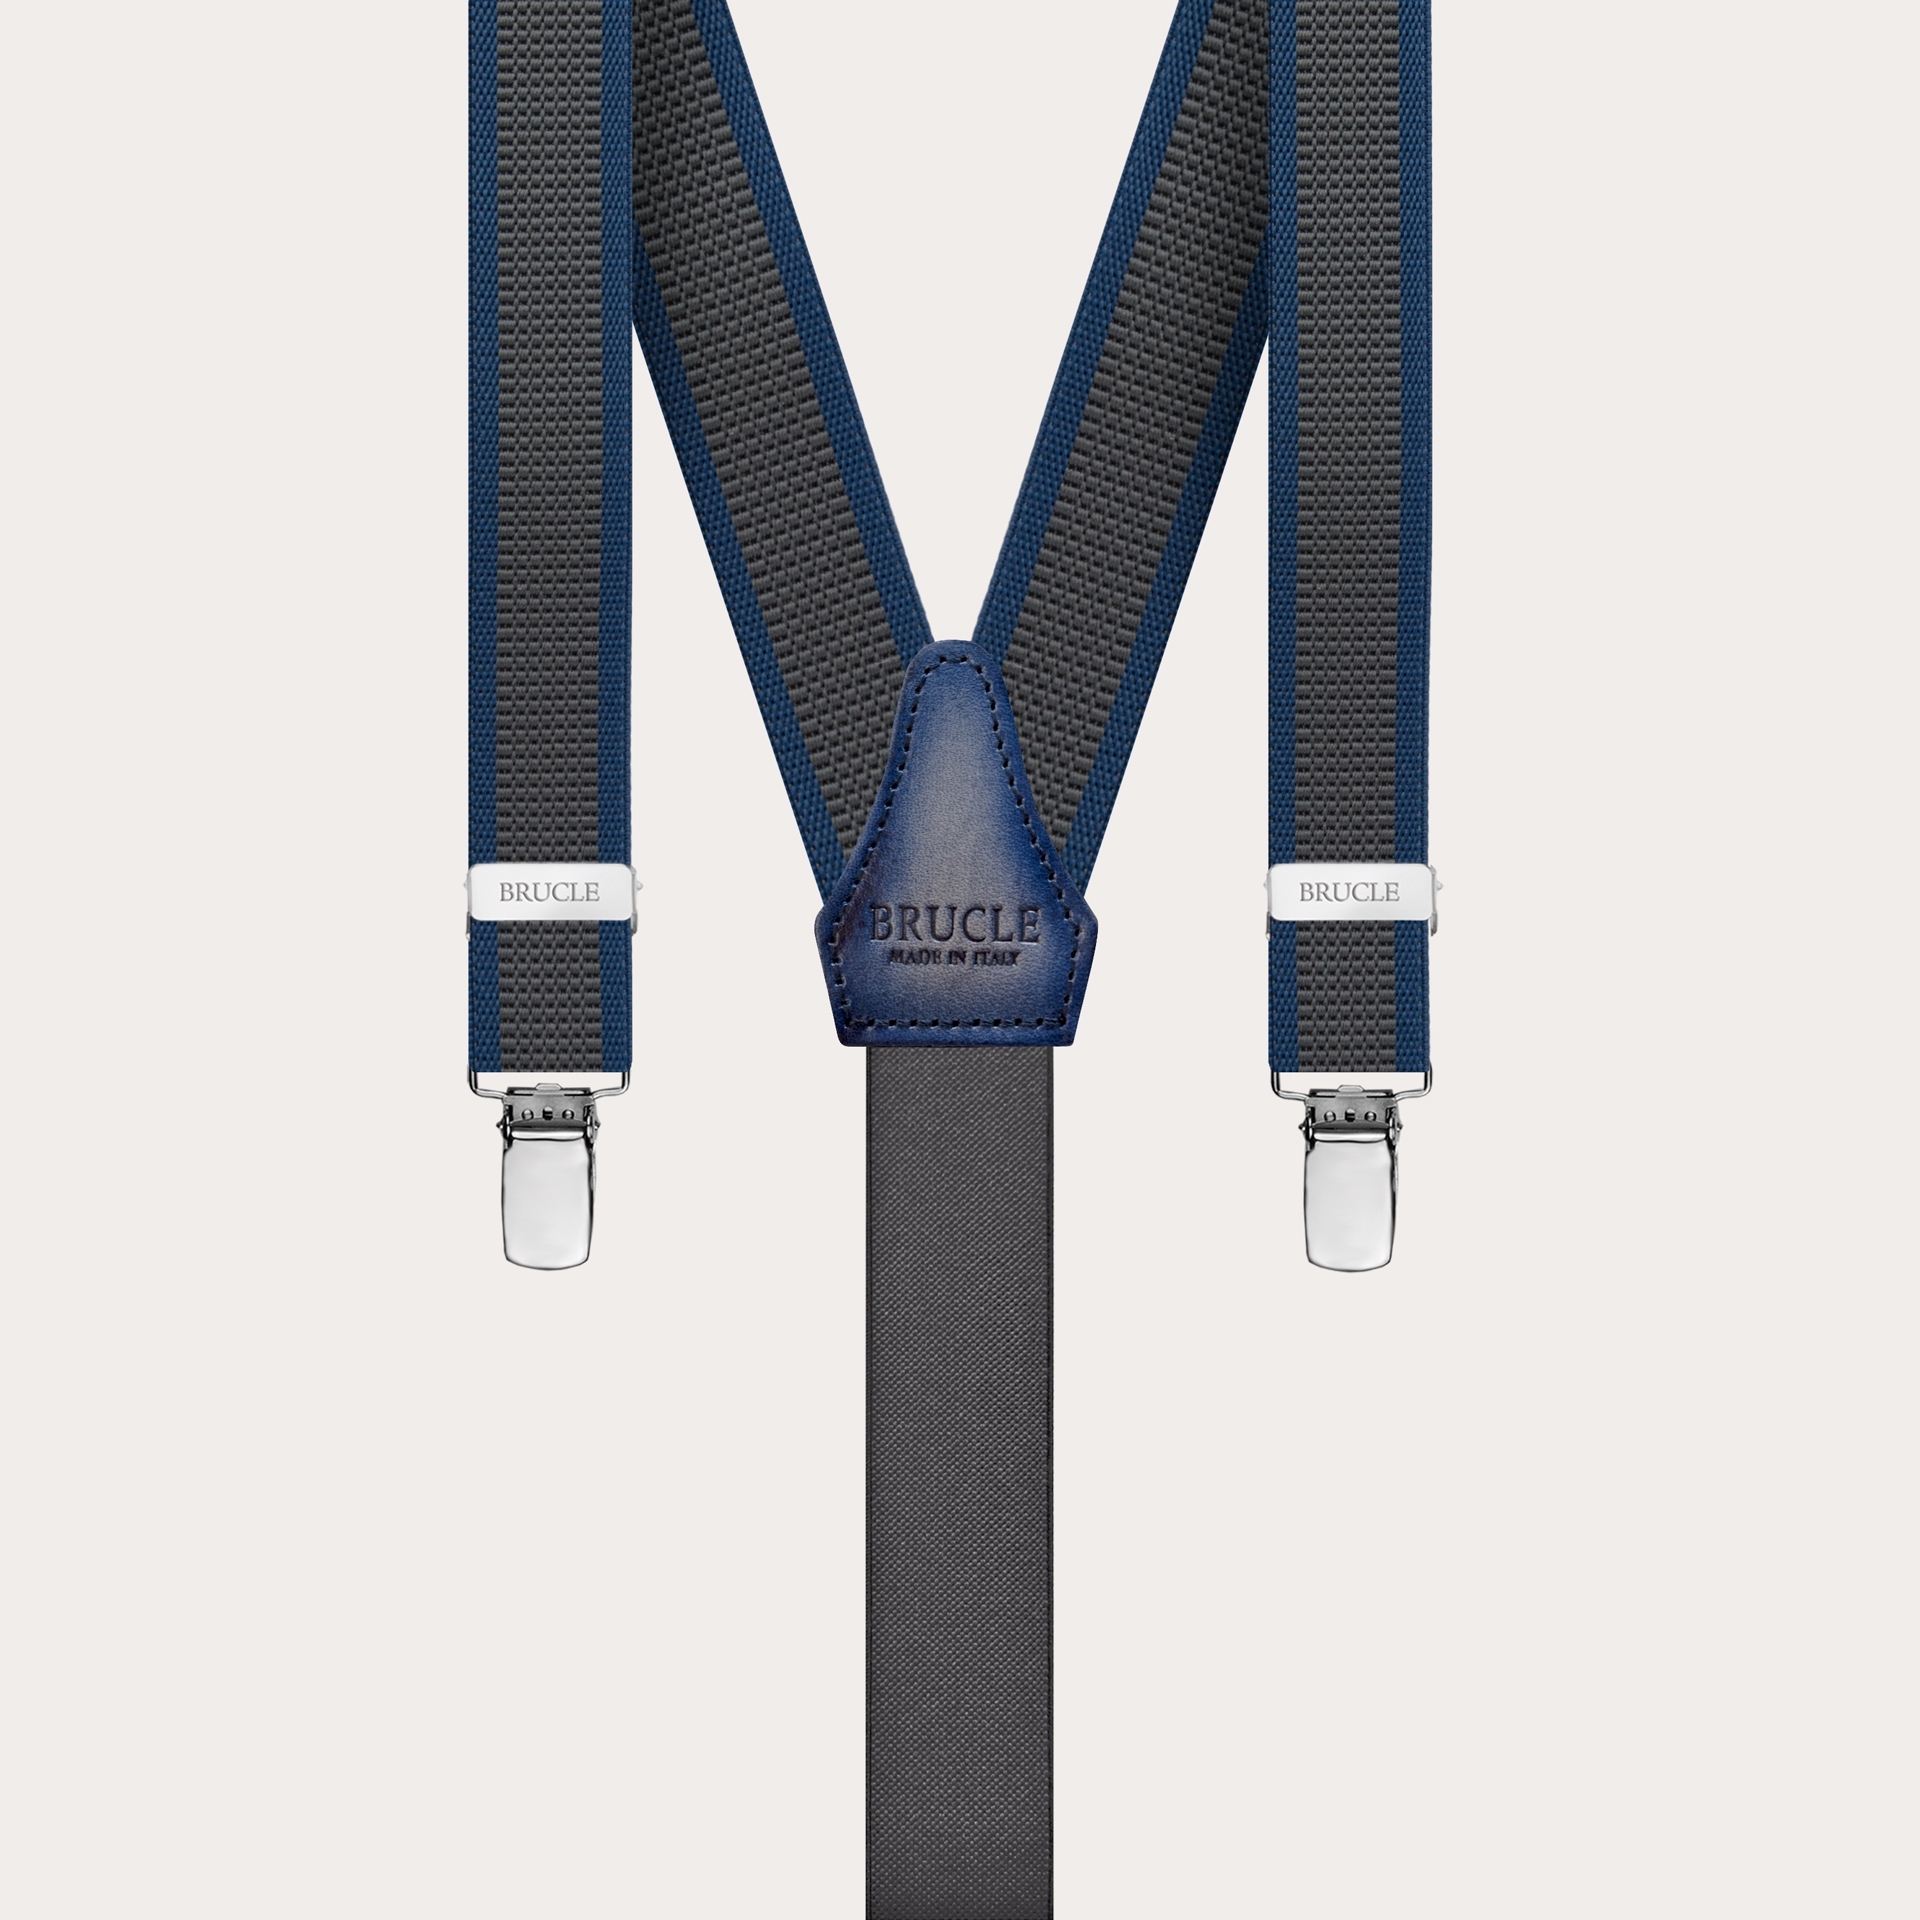 Thin nickel free suspenders with side bands, grey and blue